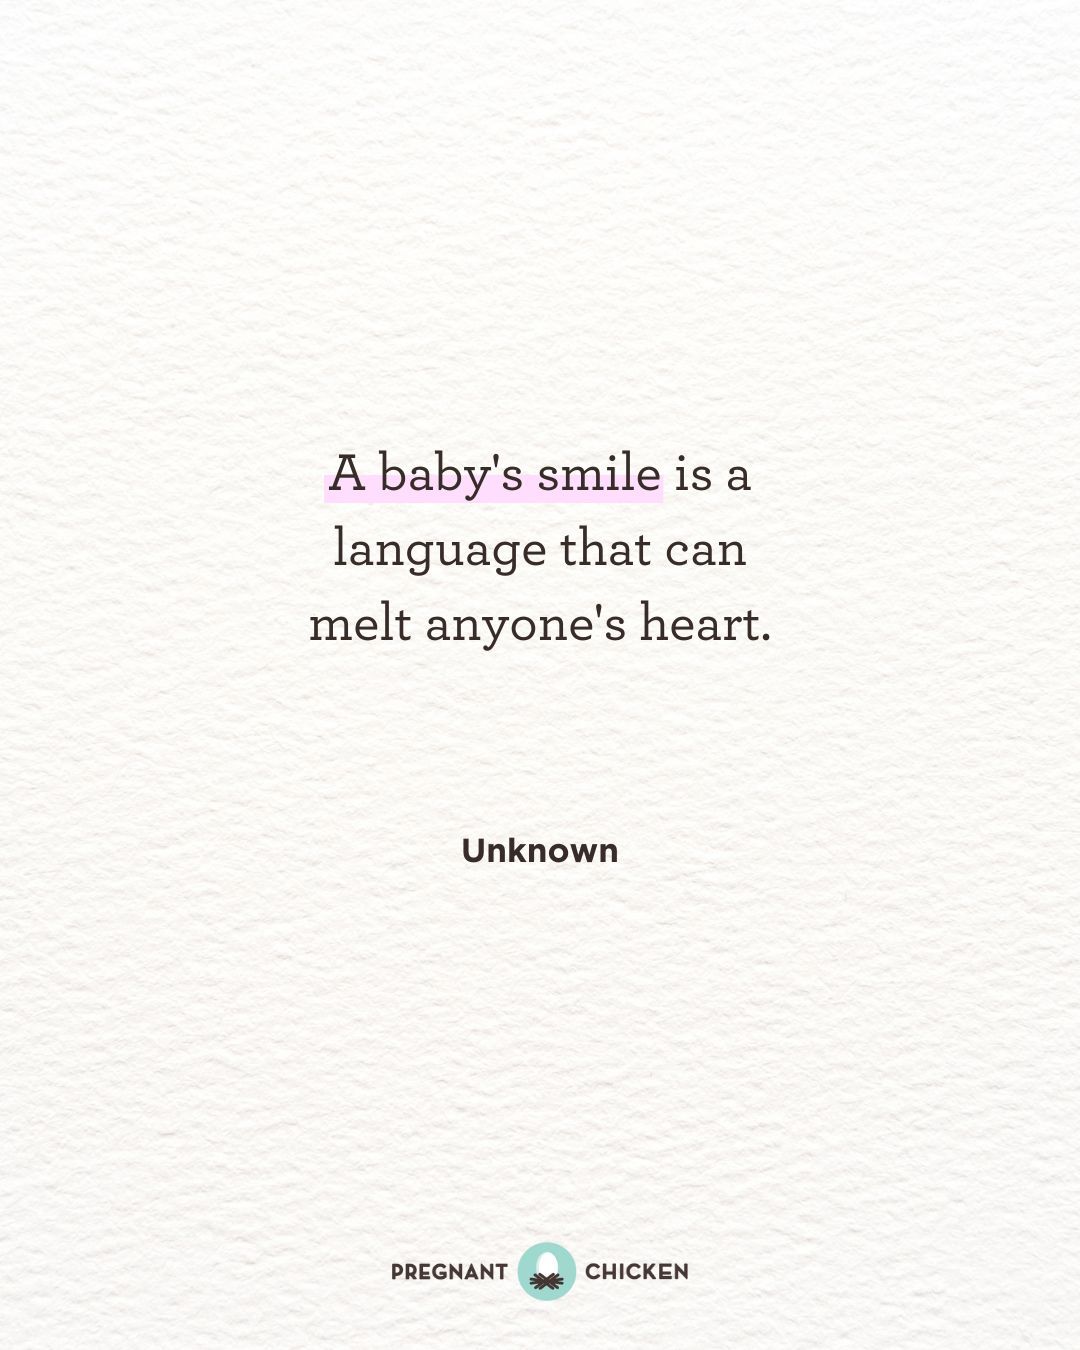 A baby's smile is a language that can melt anyone's heart.